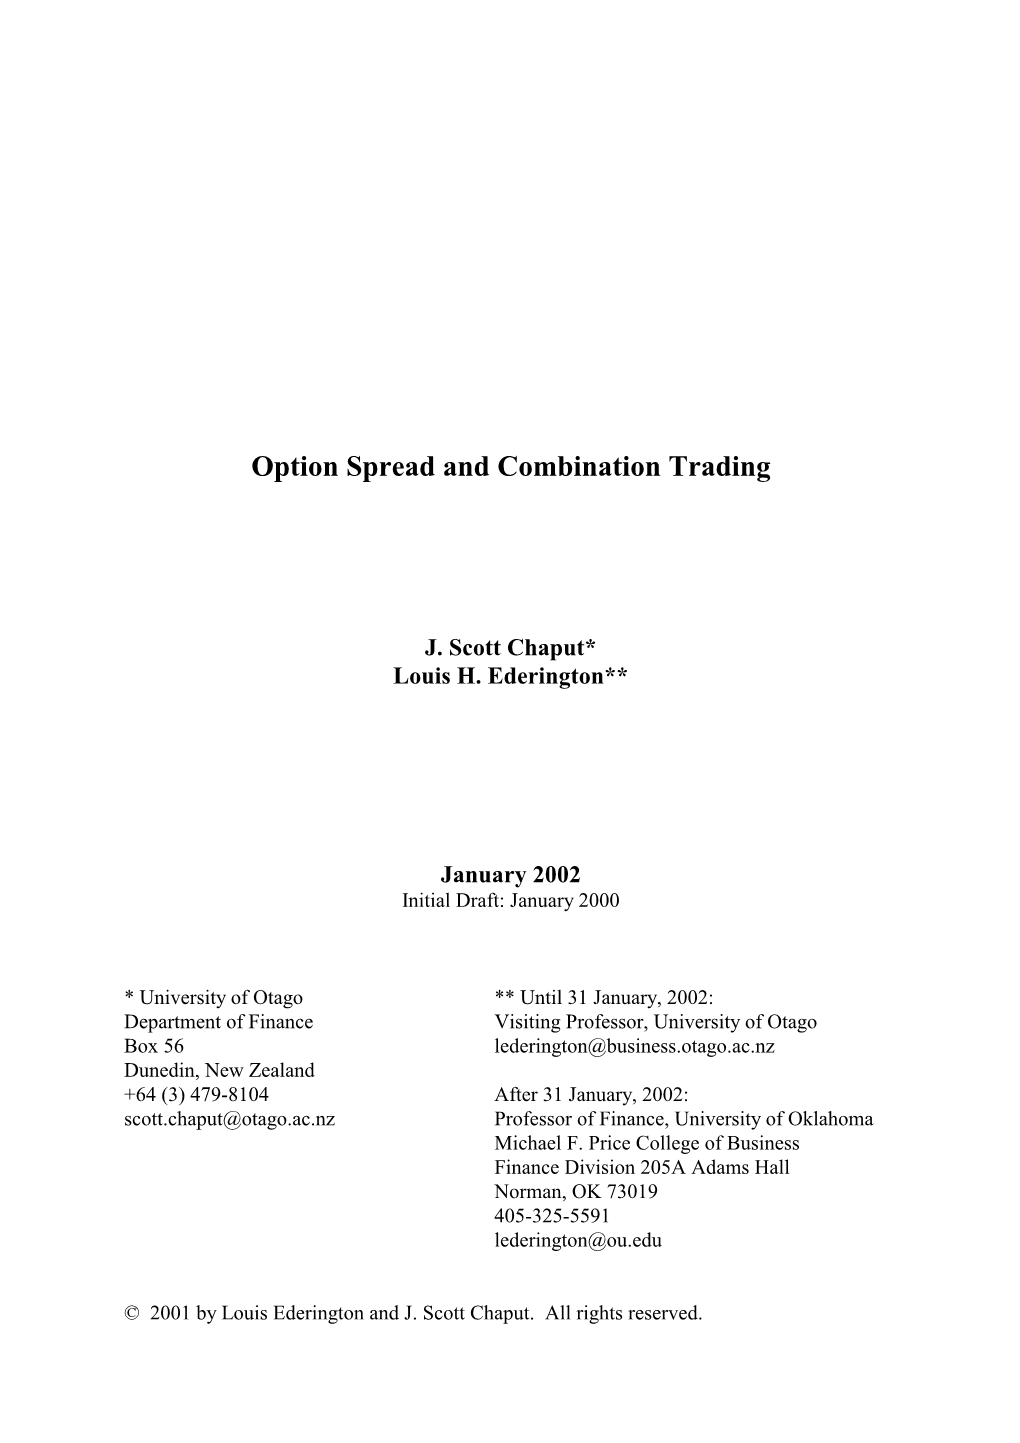 Option Spread and Combination Trading